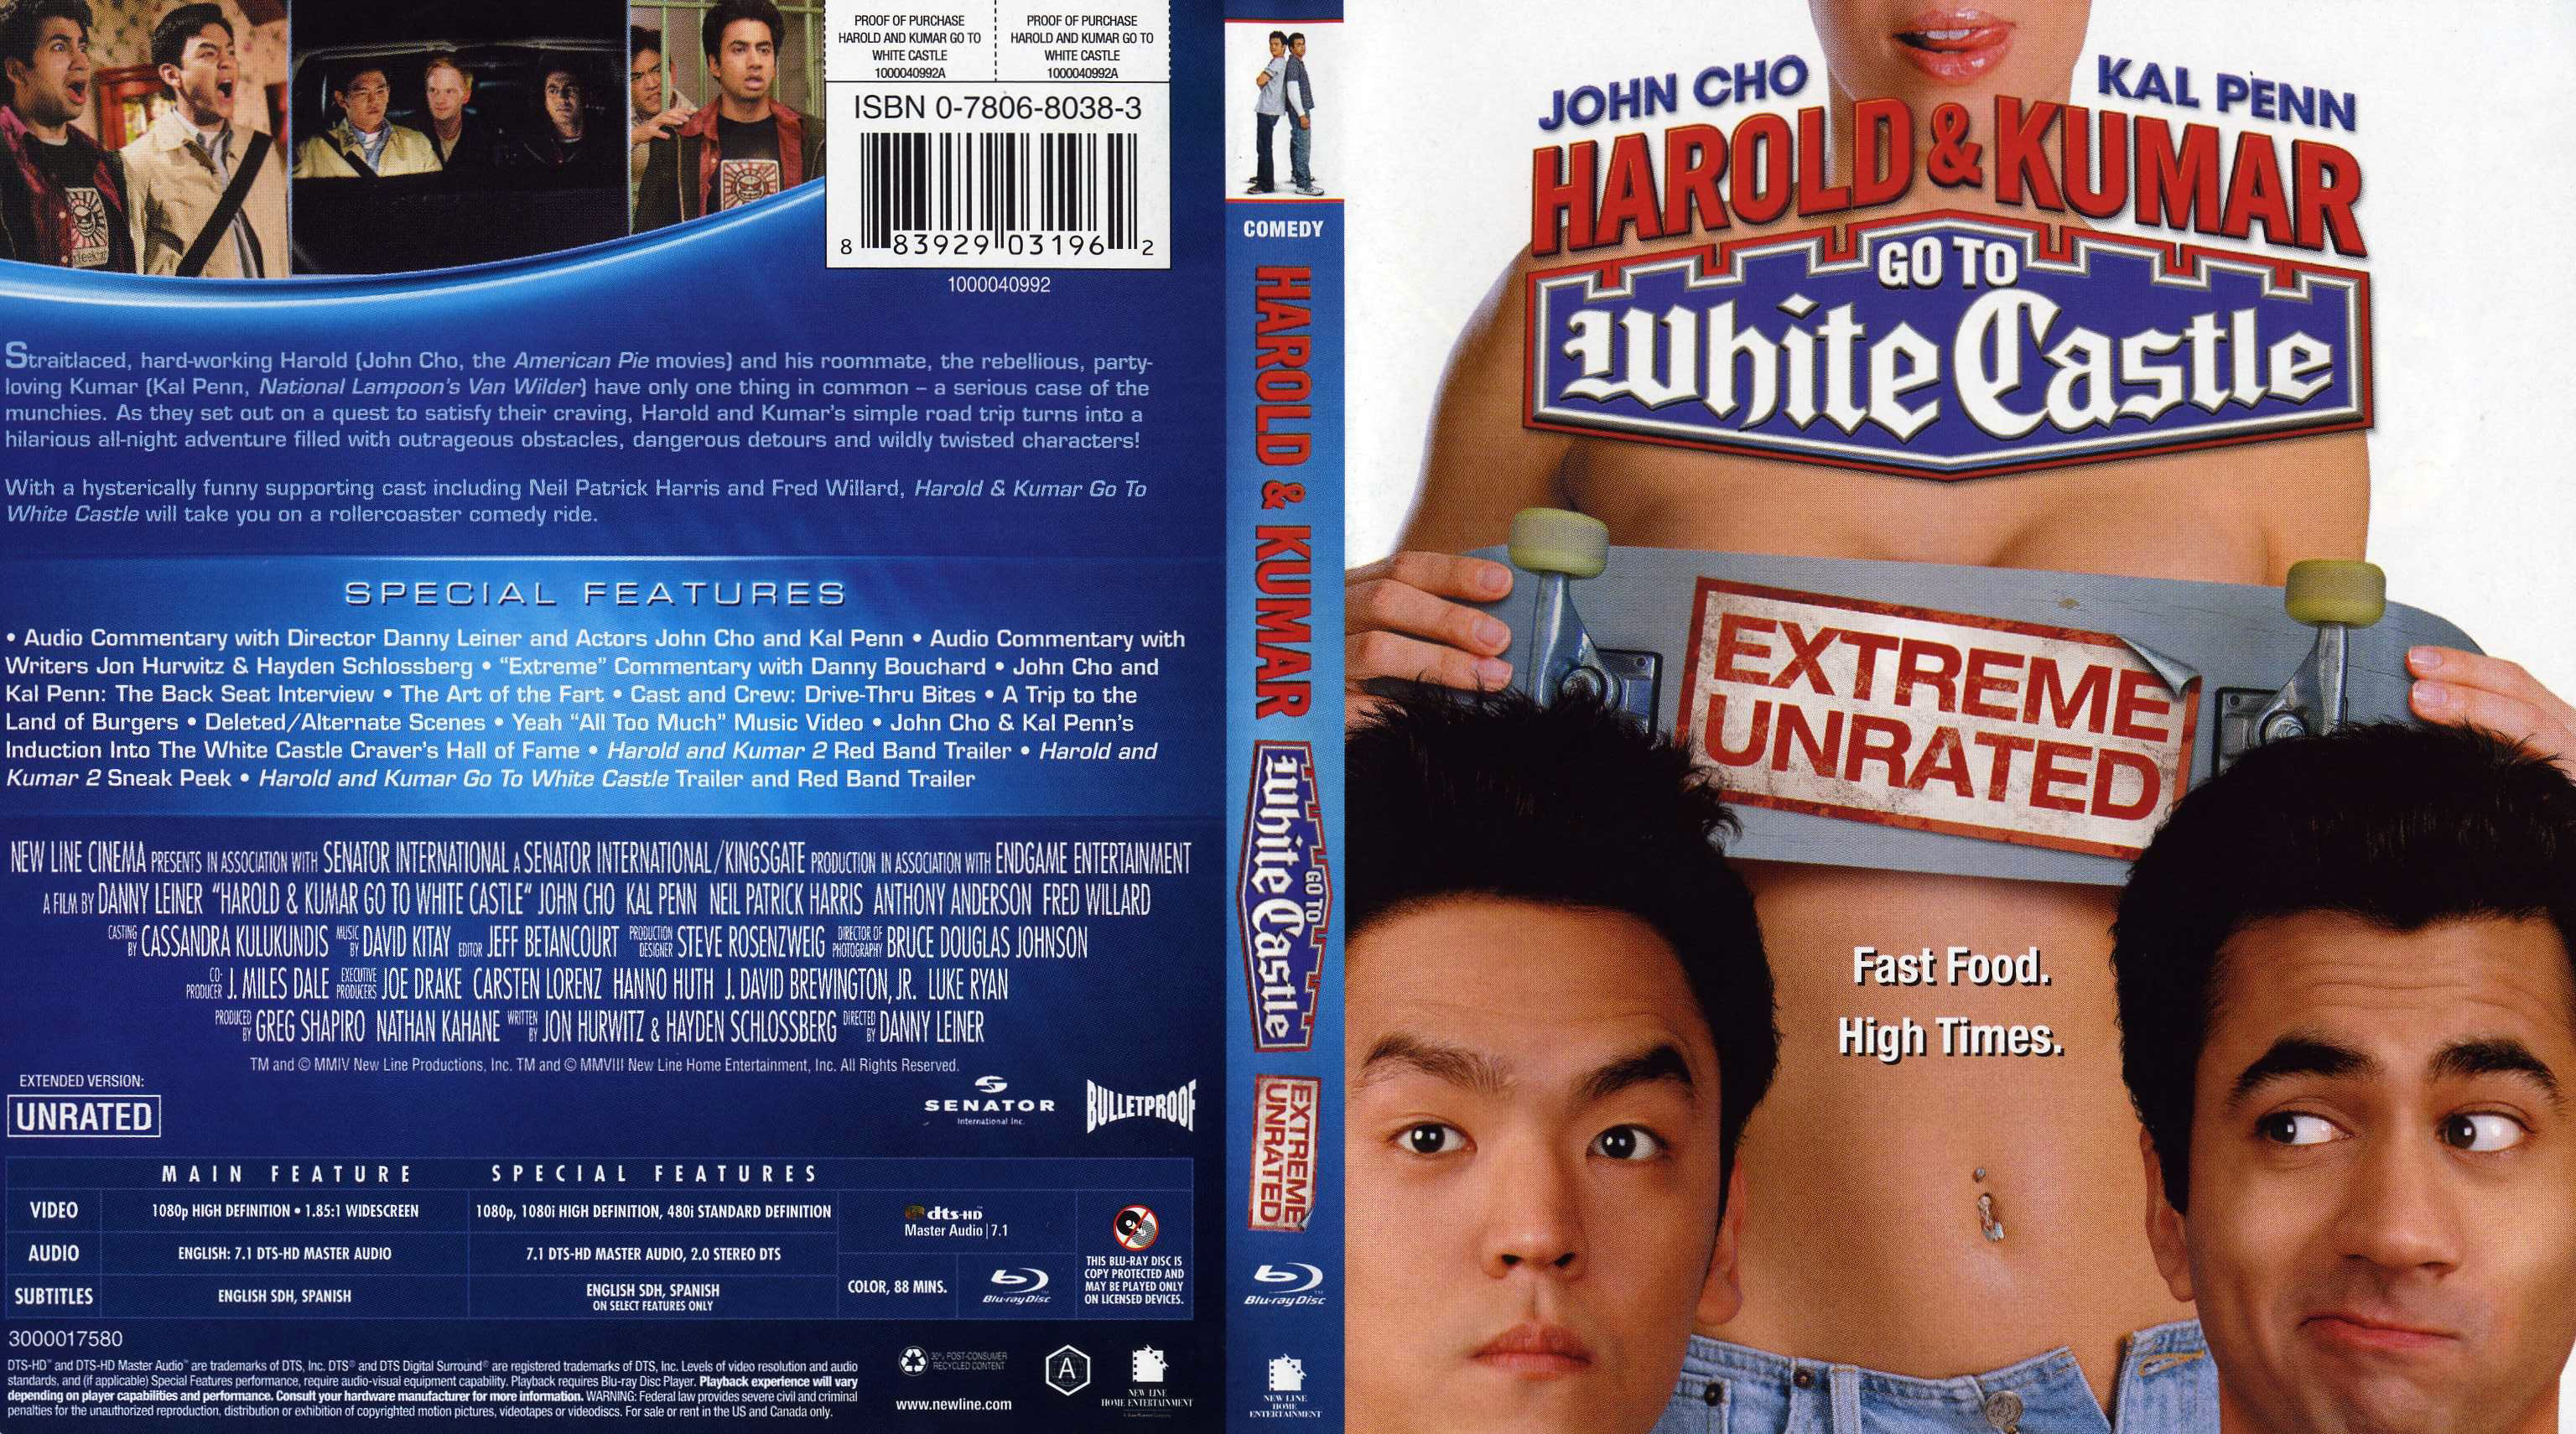 Harold & Kumar Go to White Castle (2004) Blu-ray - front.